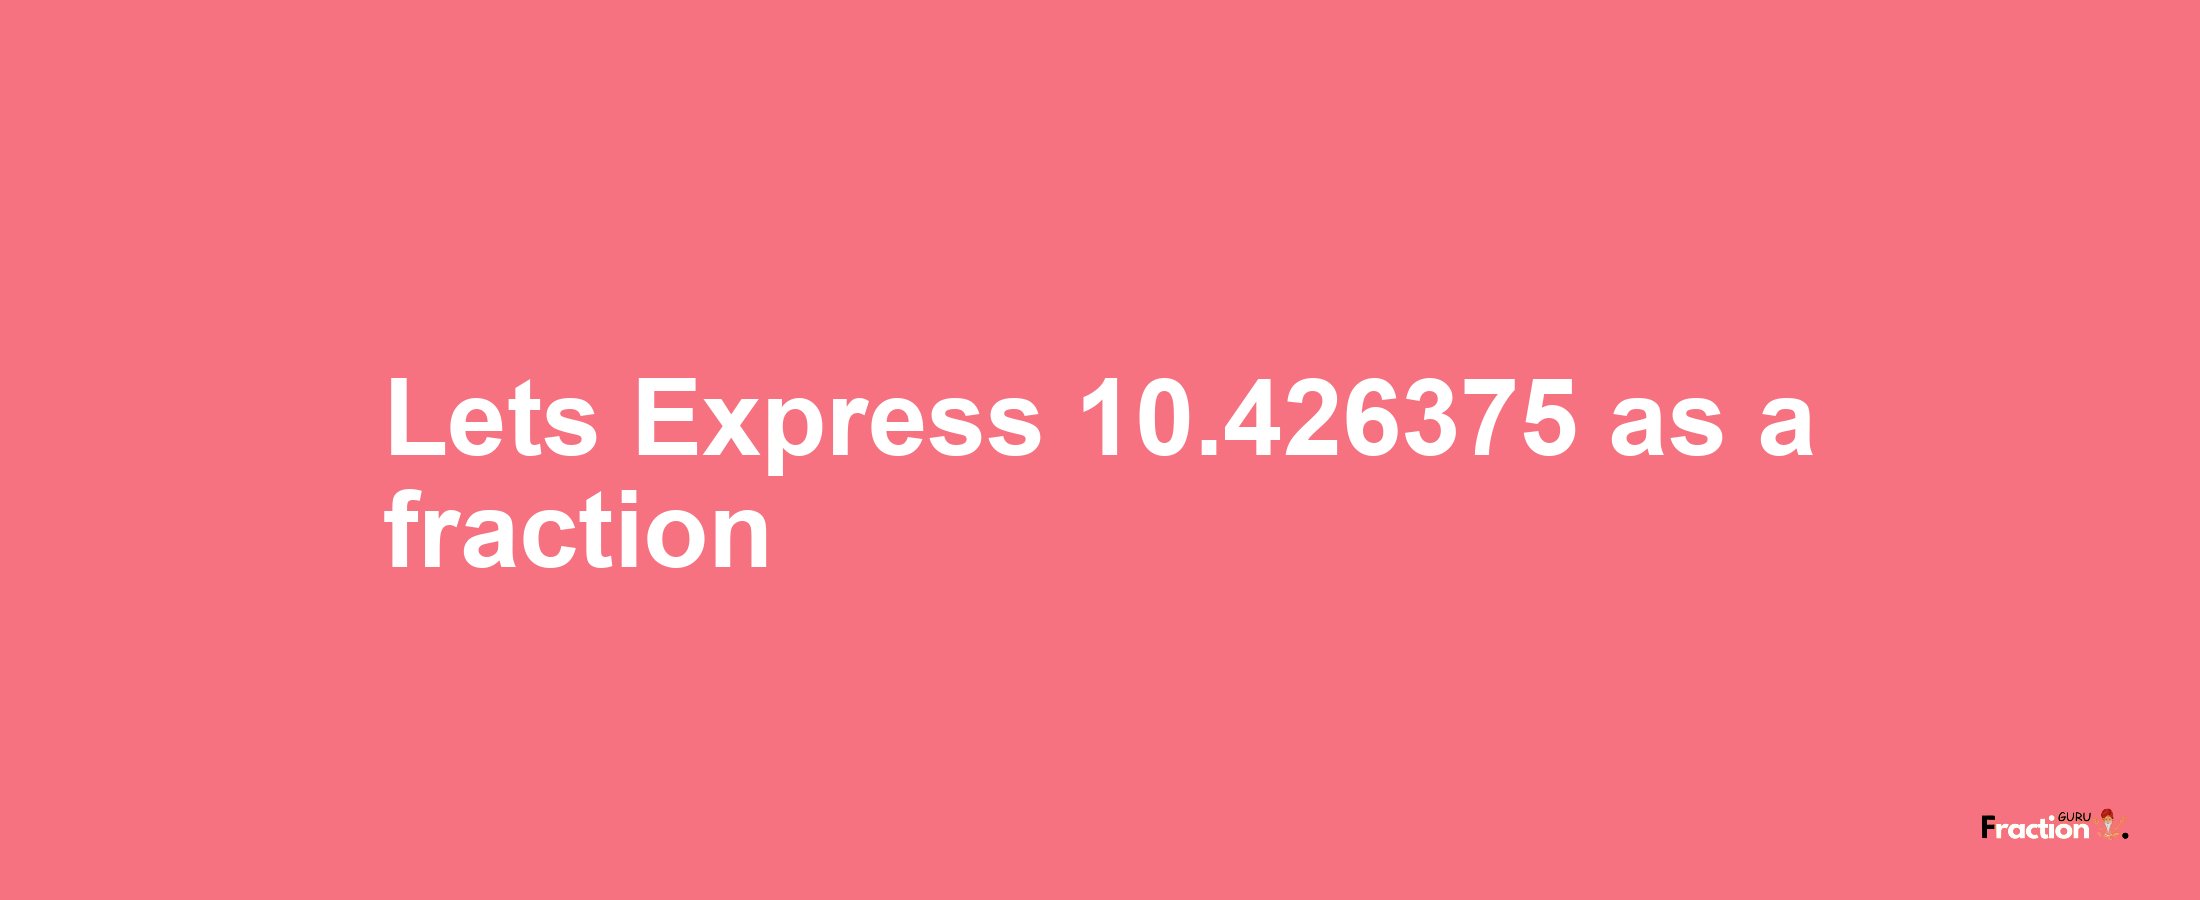 Lets Express 10.426375 as afraction